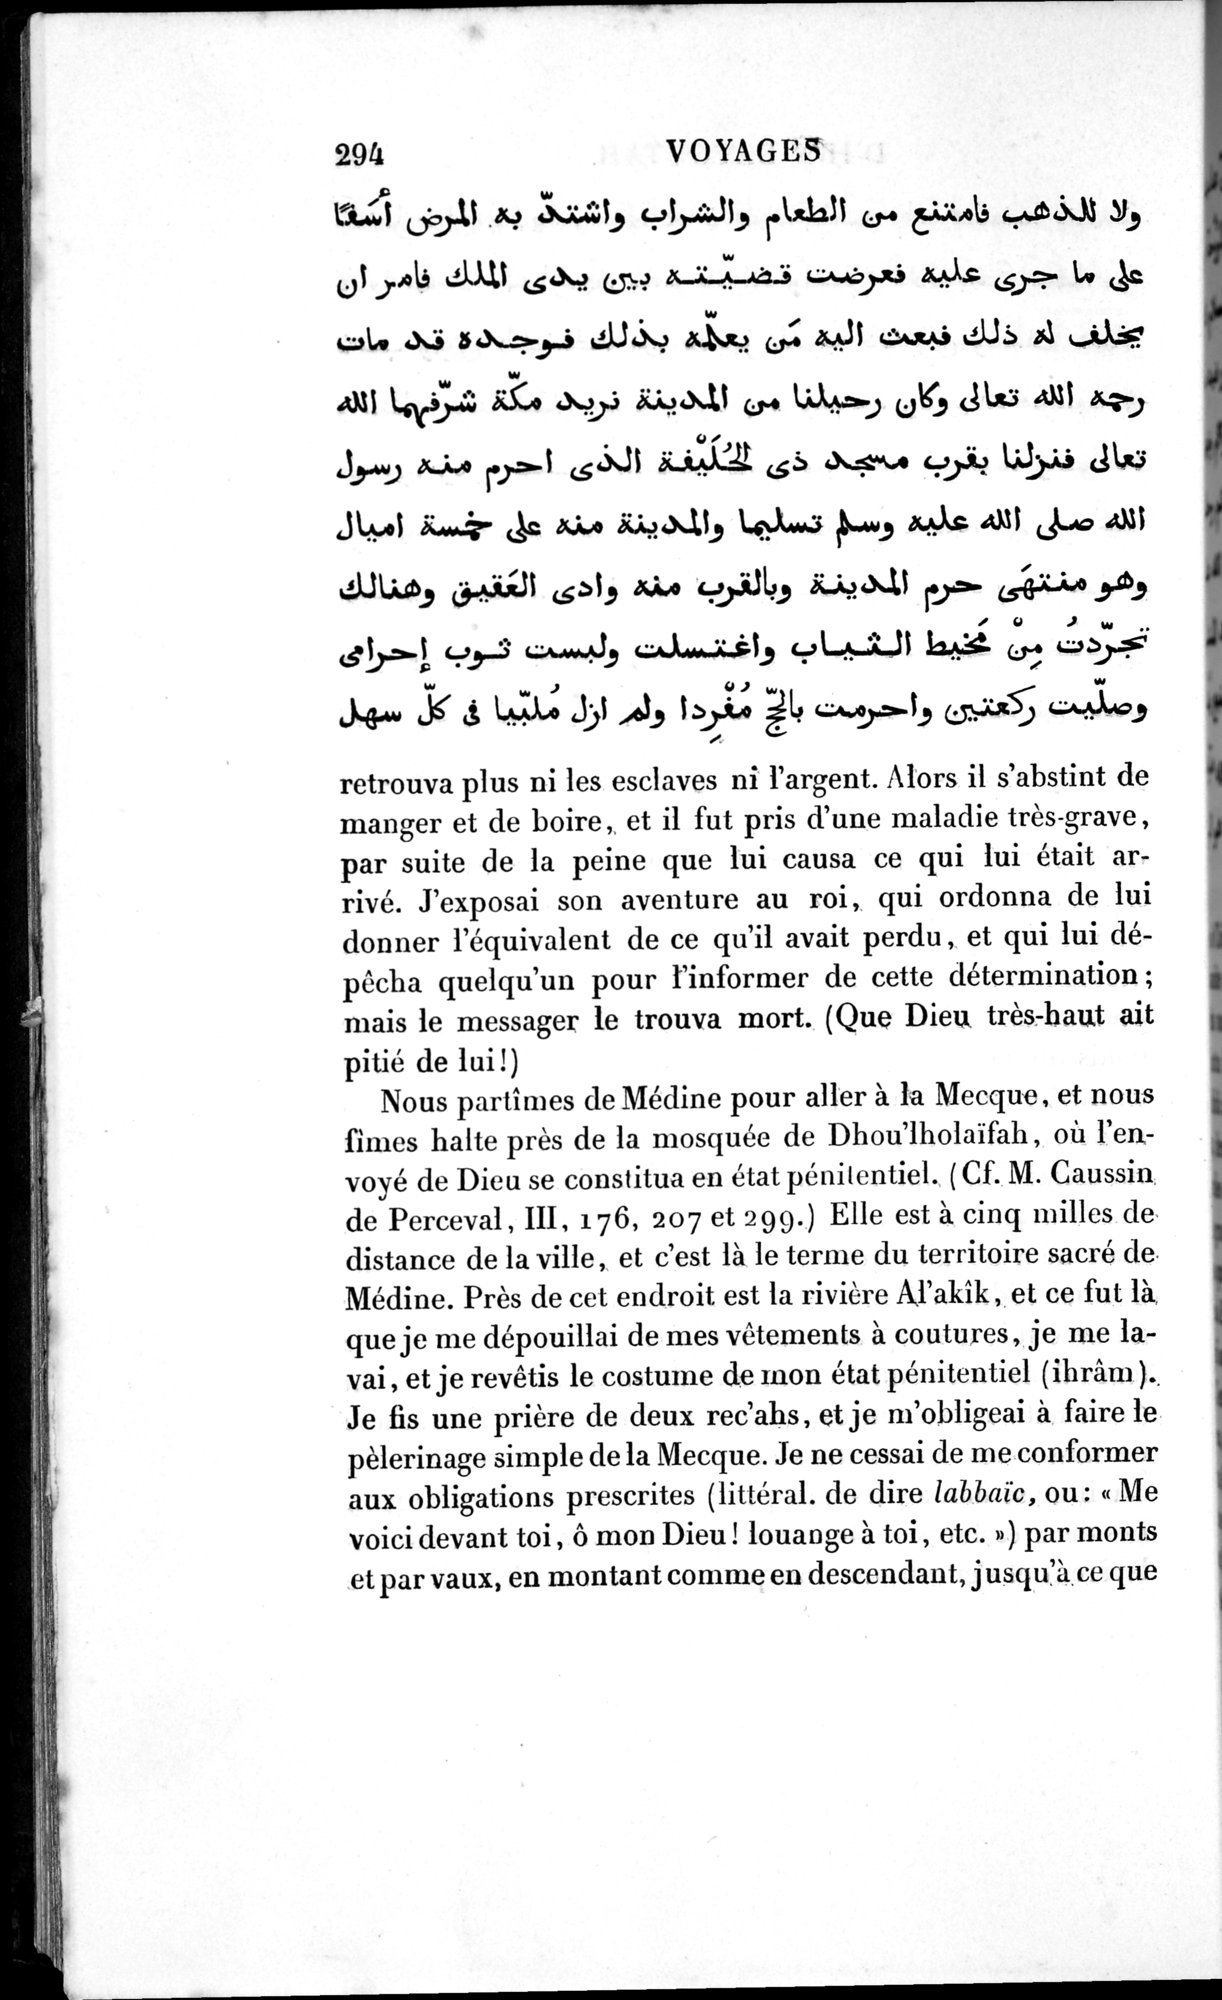 Voyages d'Ibn Batoutah : vol.1 / Page 354 (Grayscale High Resolution Image)